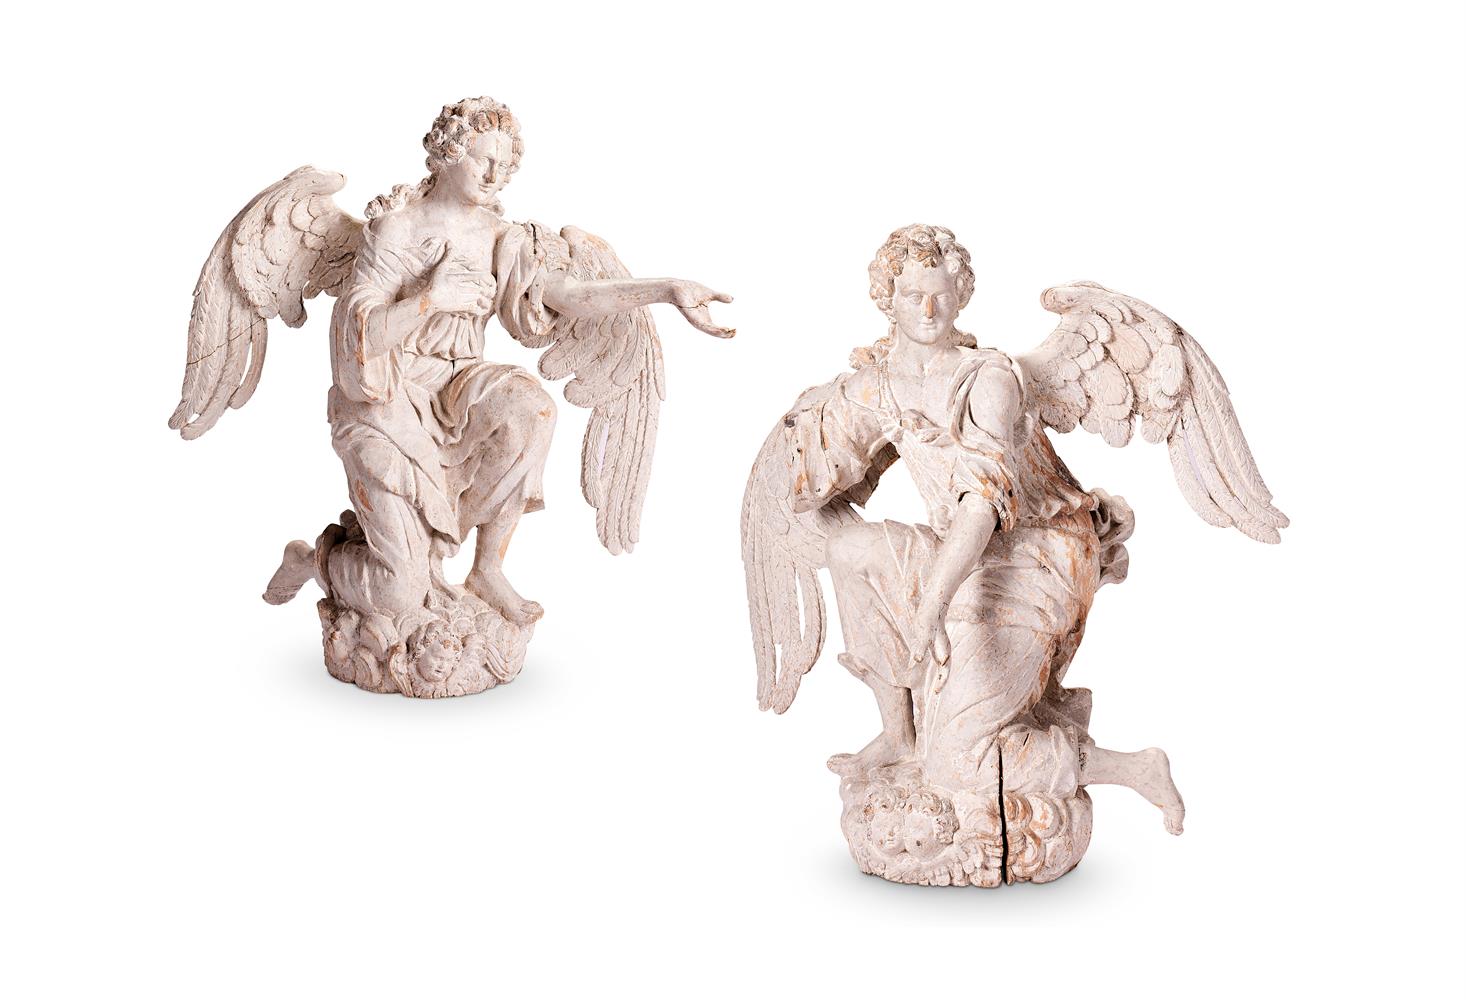 A LARGE PAIR OF CARVED WOOD FIGURES OF ANGELS CONTINENTAL, LATE 17TH/EARLY 18TH CENTURY